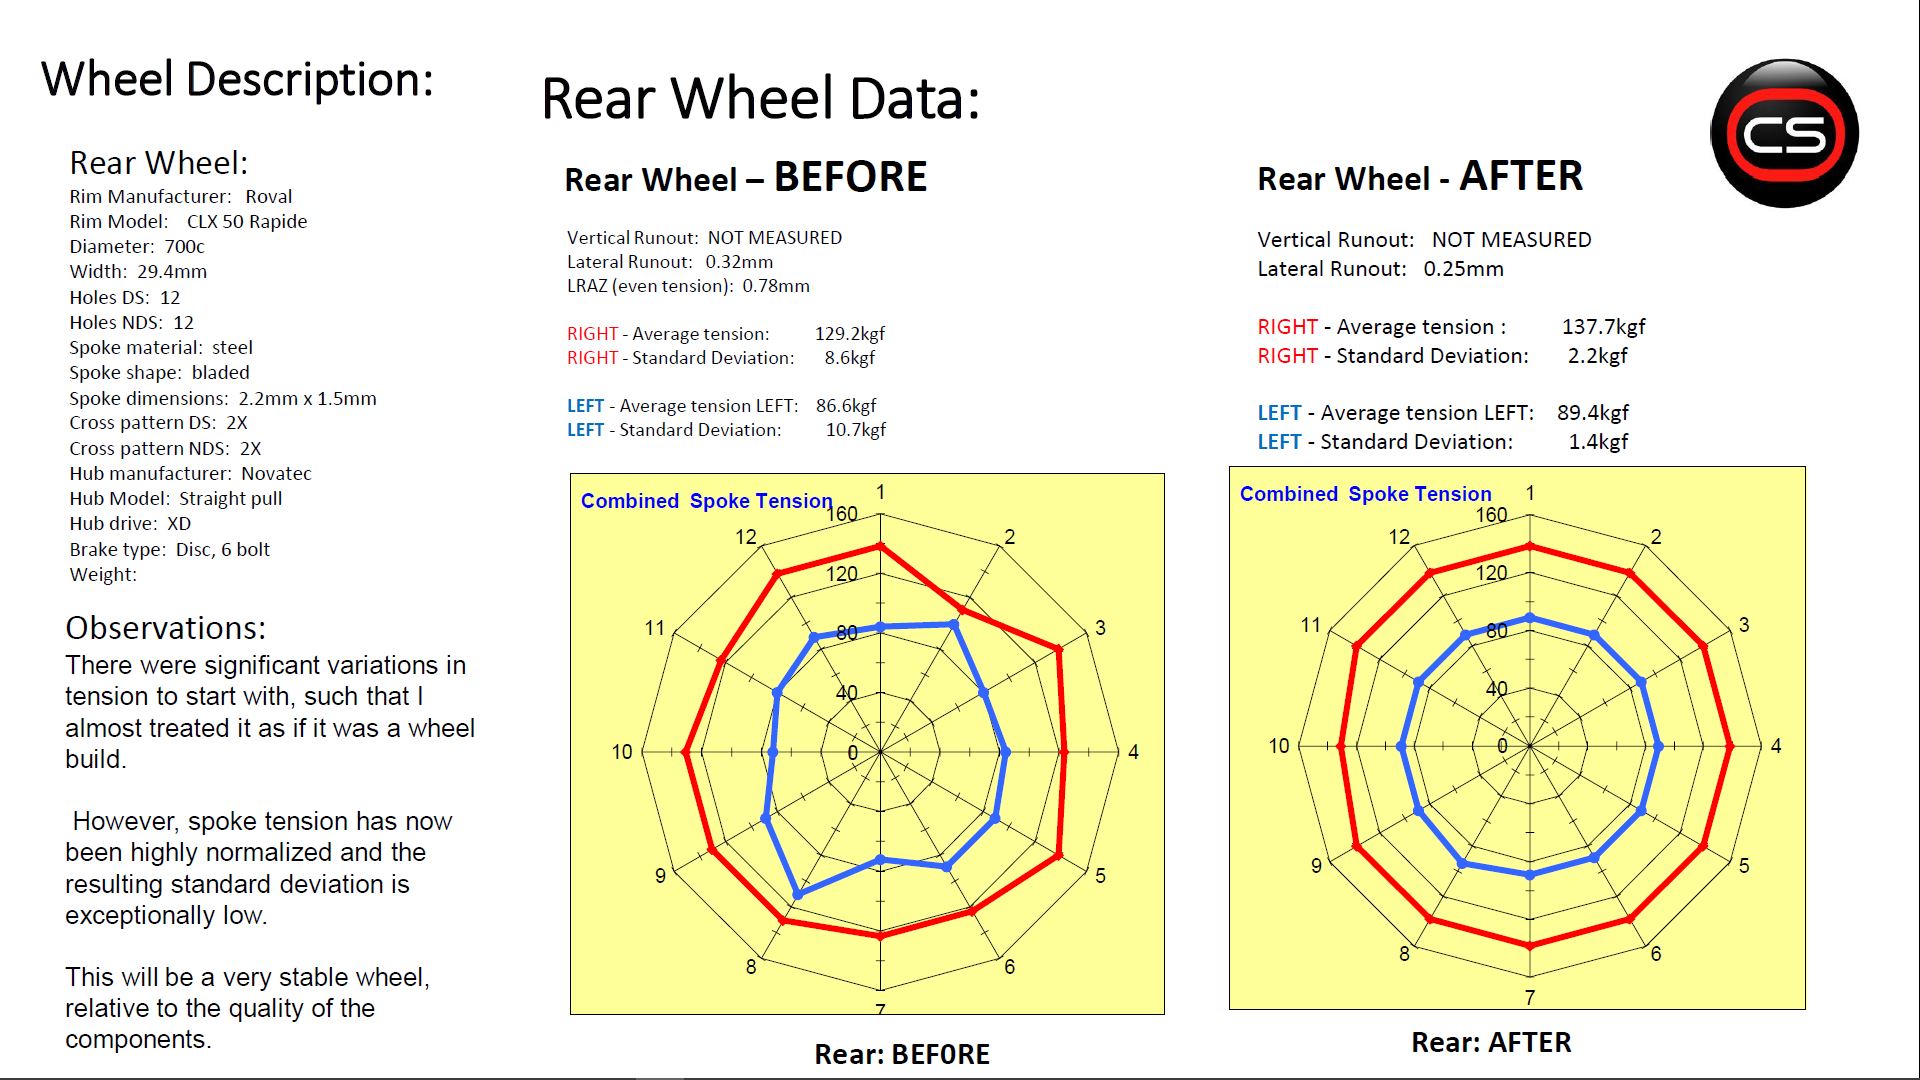 Optimized wheel reporting, before and after